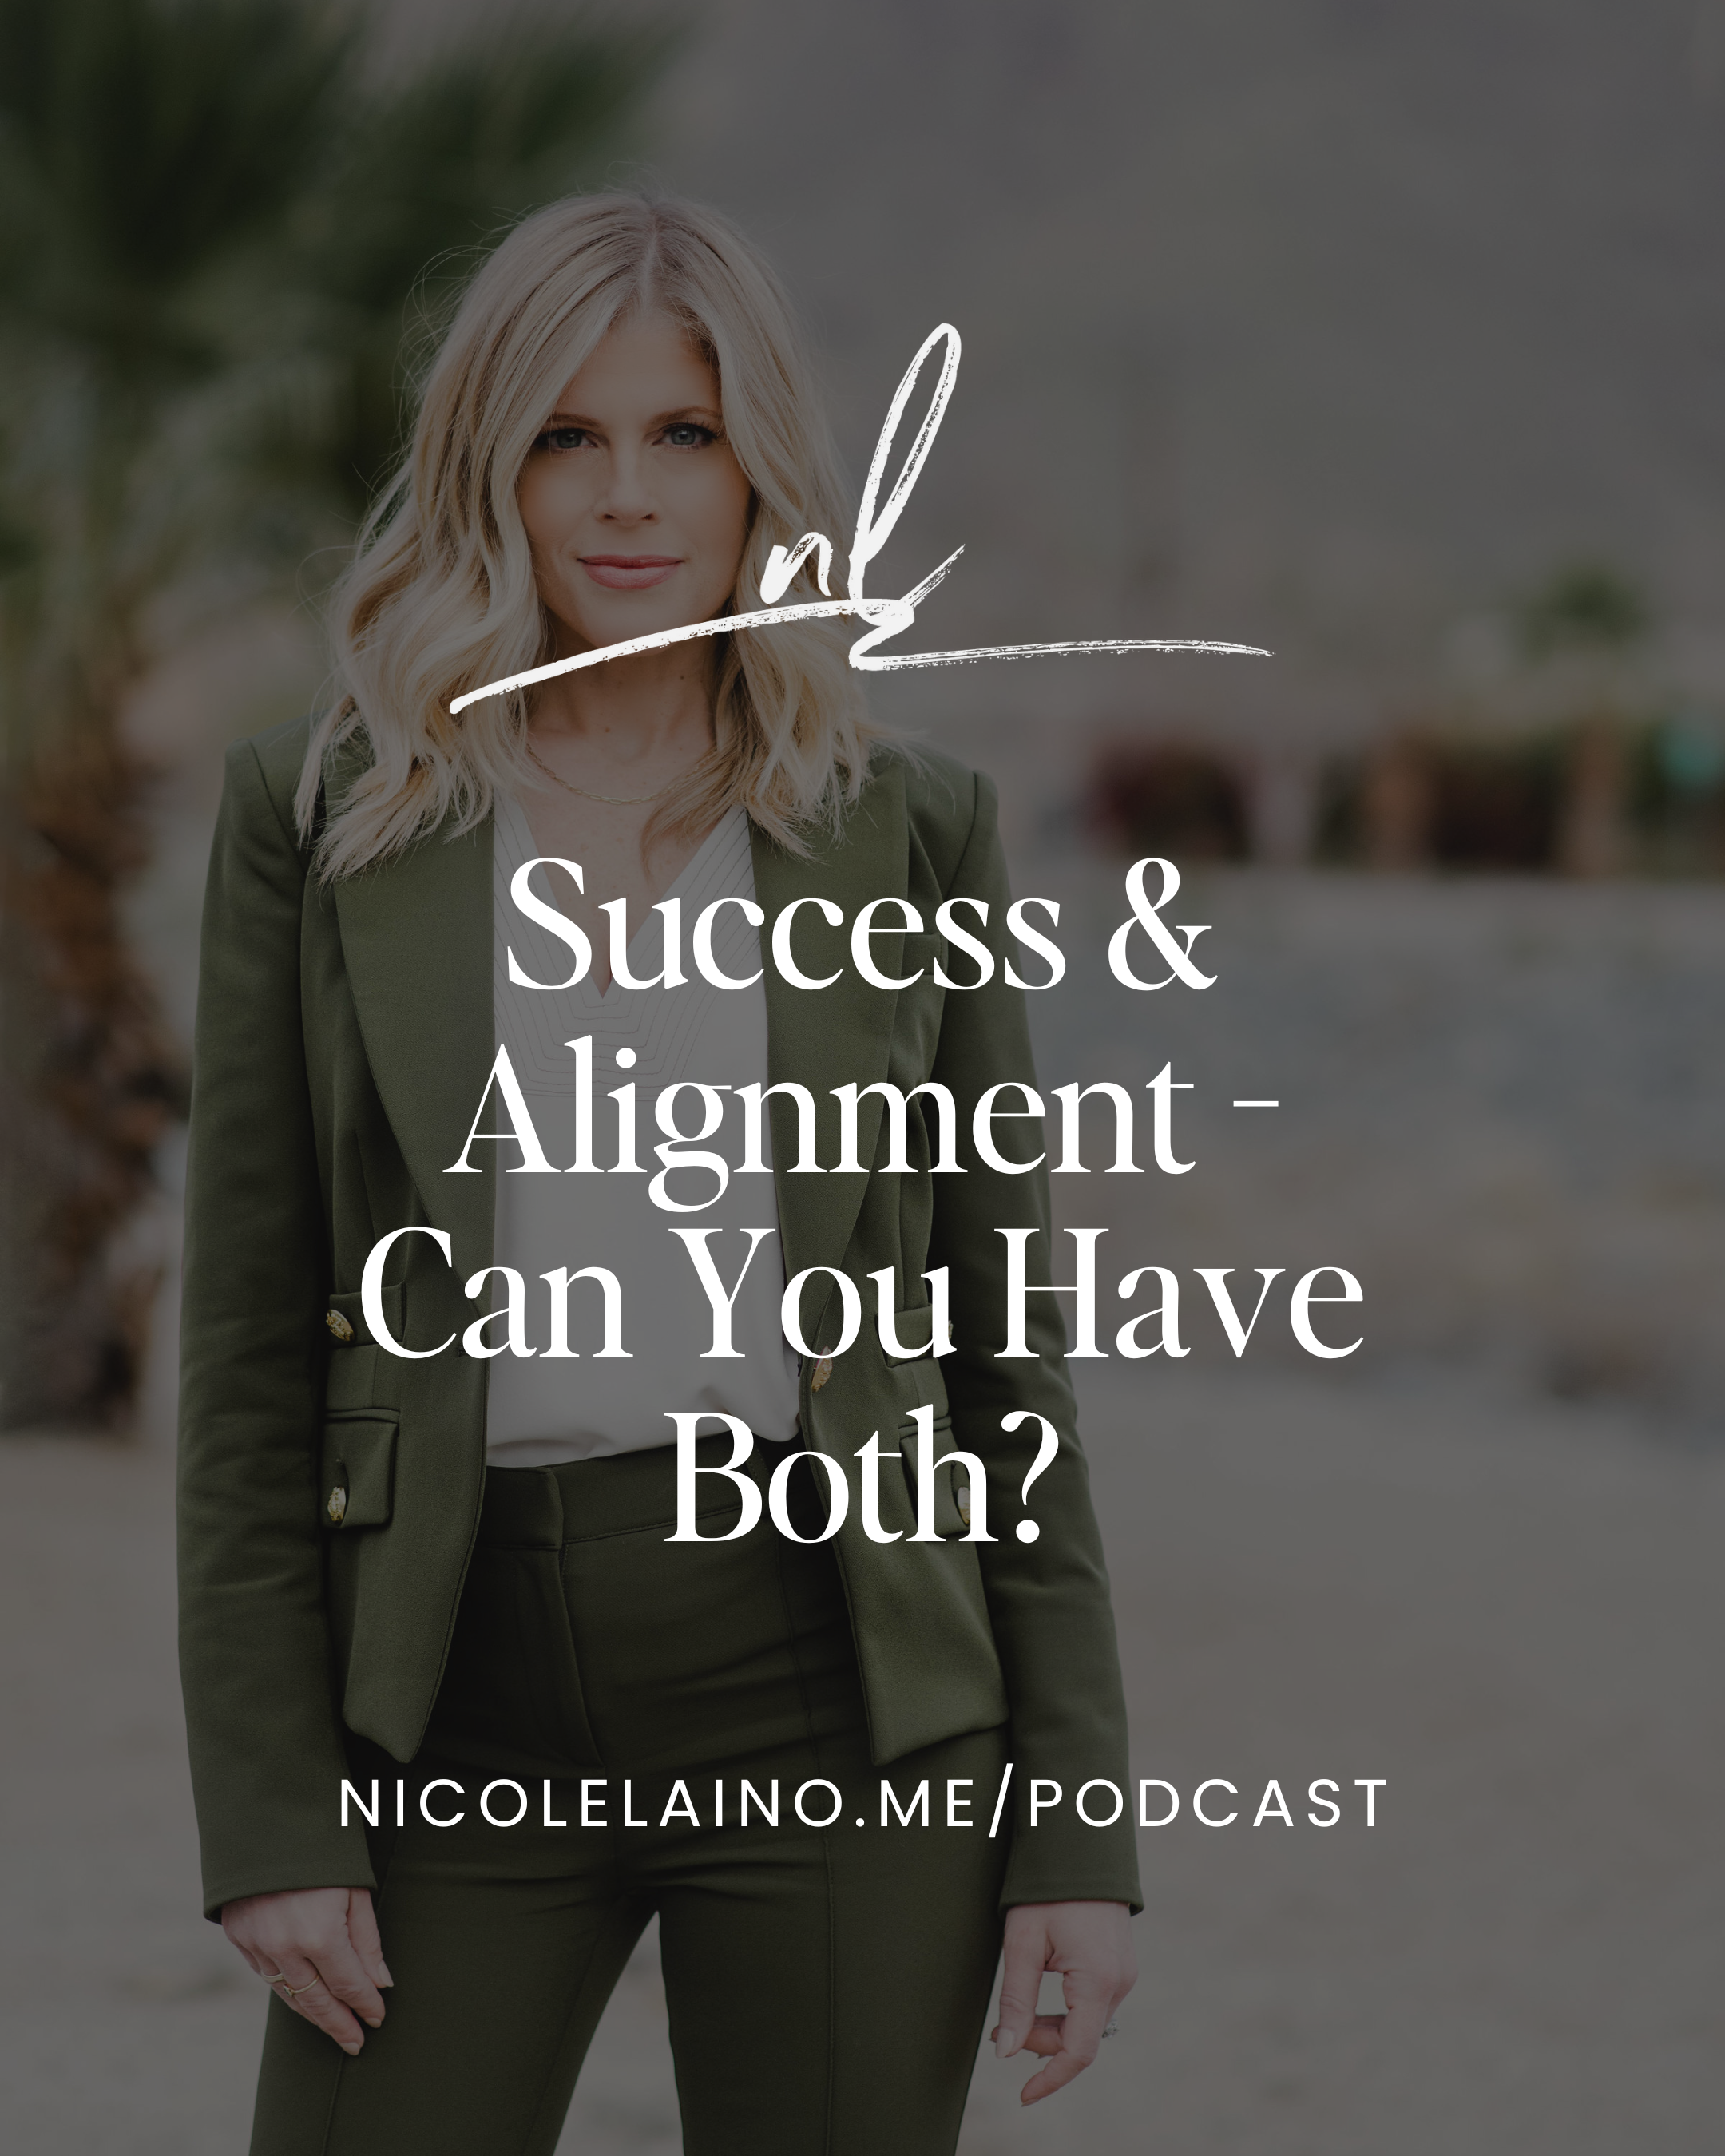 Success & Alignment - Can You Have Both?